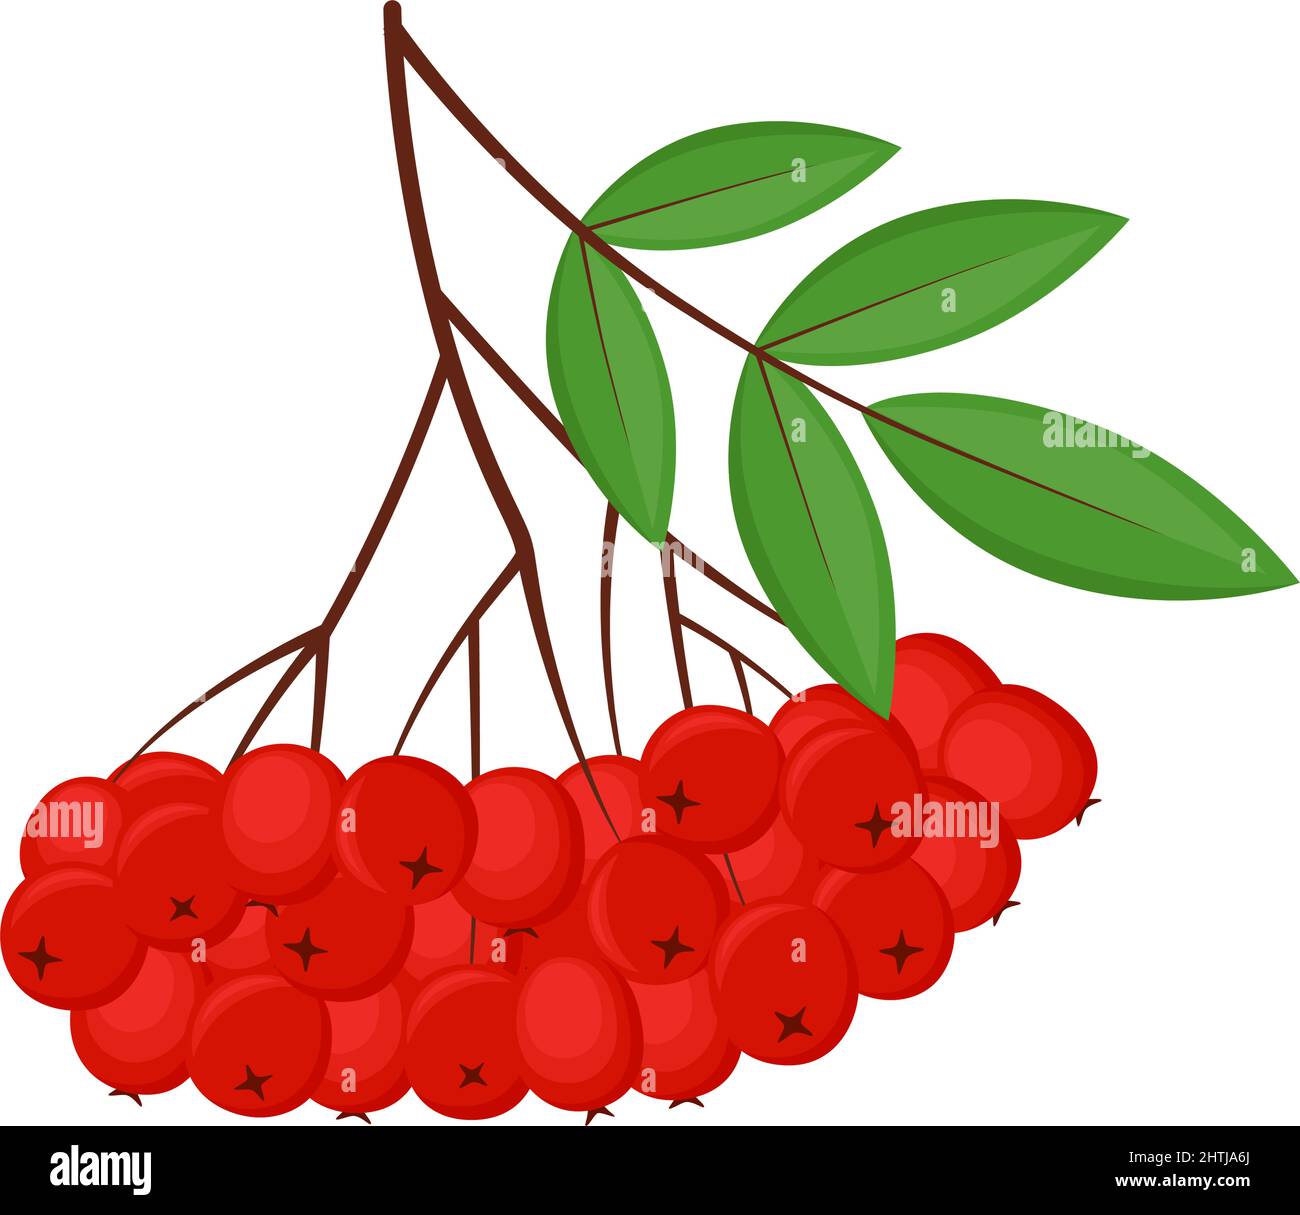 Rowan branch with green leaves and red berries, vector illustration Stock Vector